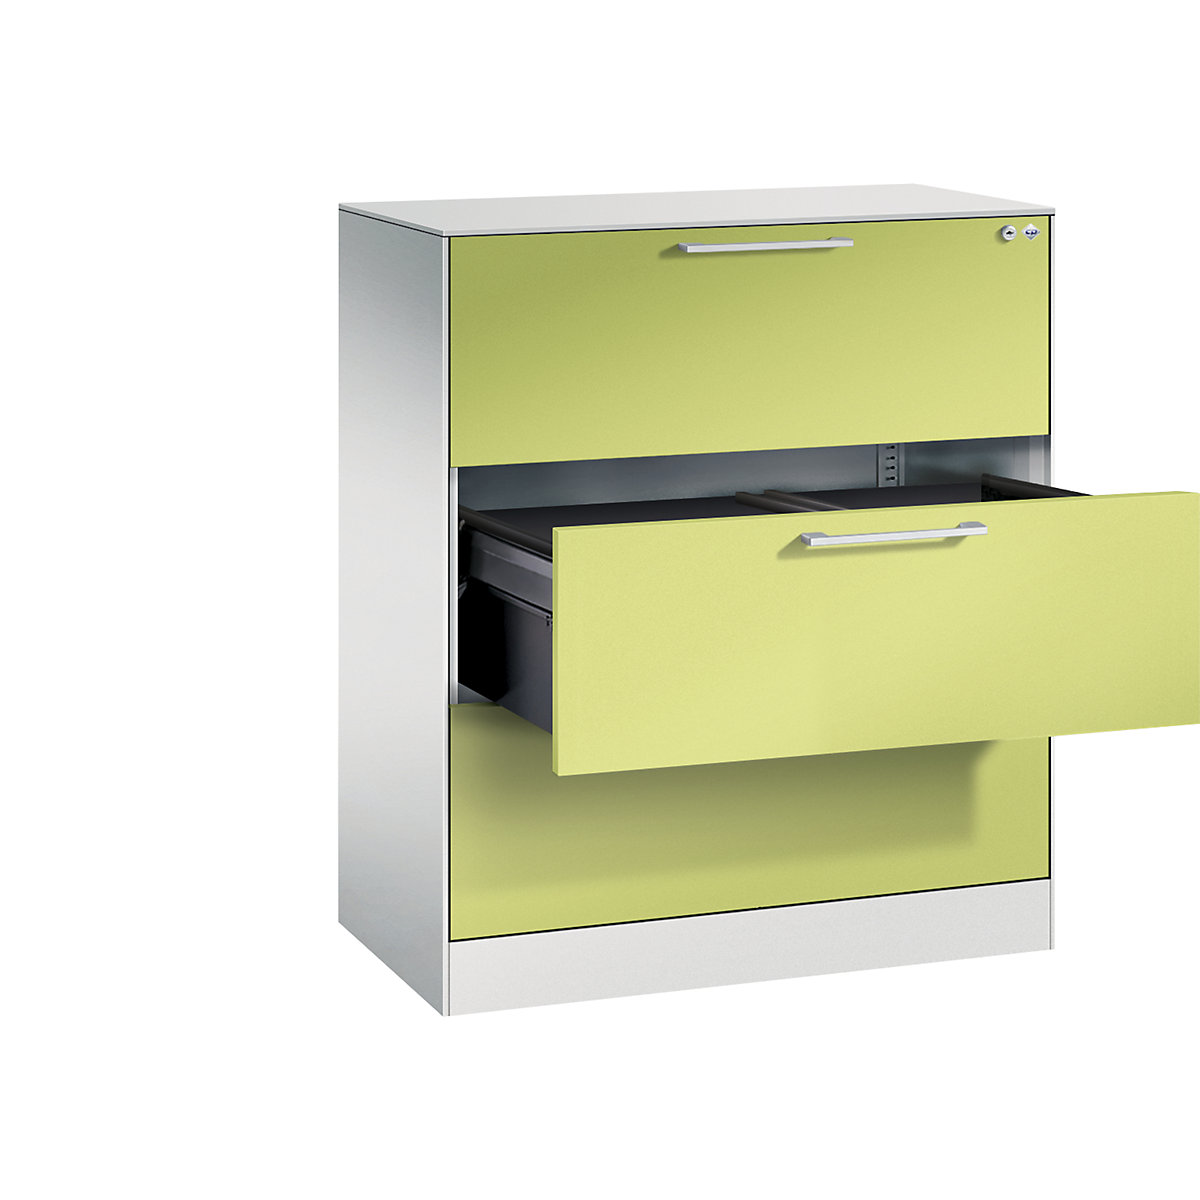 ASISTO suspension filing cabinet – C+P, width 800 mm, with 3 drawers, light grey/viridian green-16